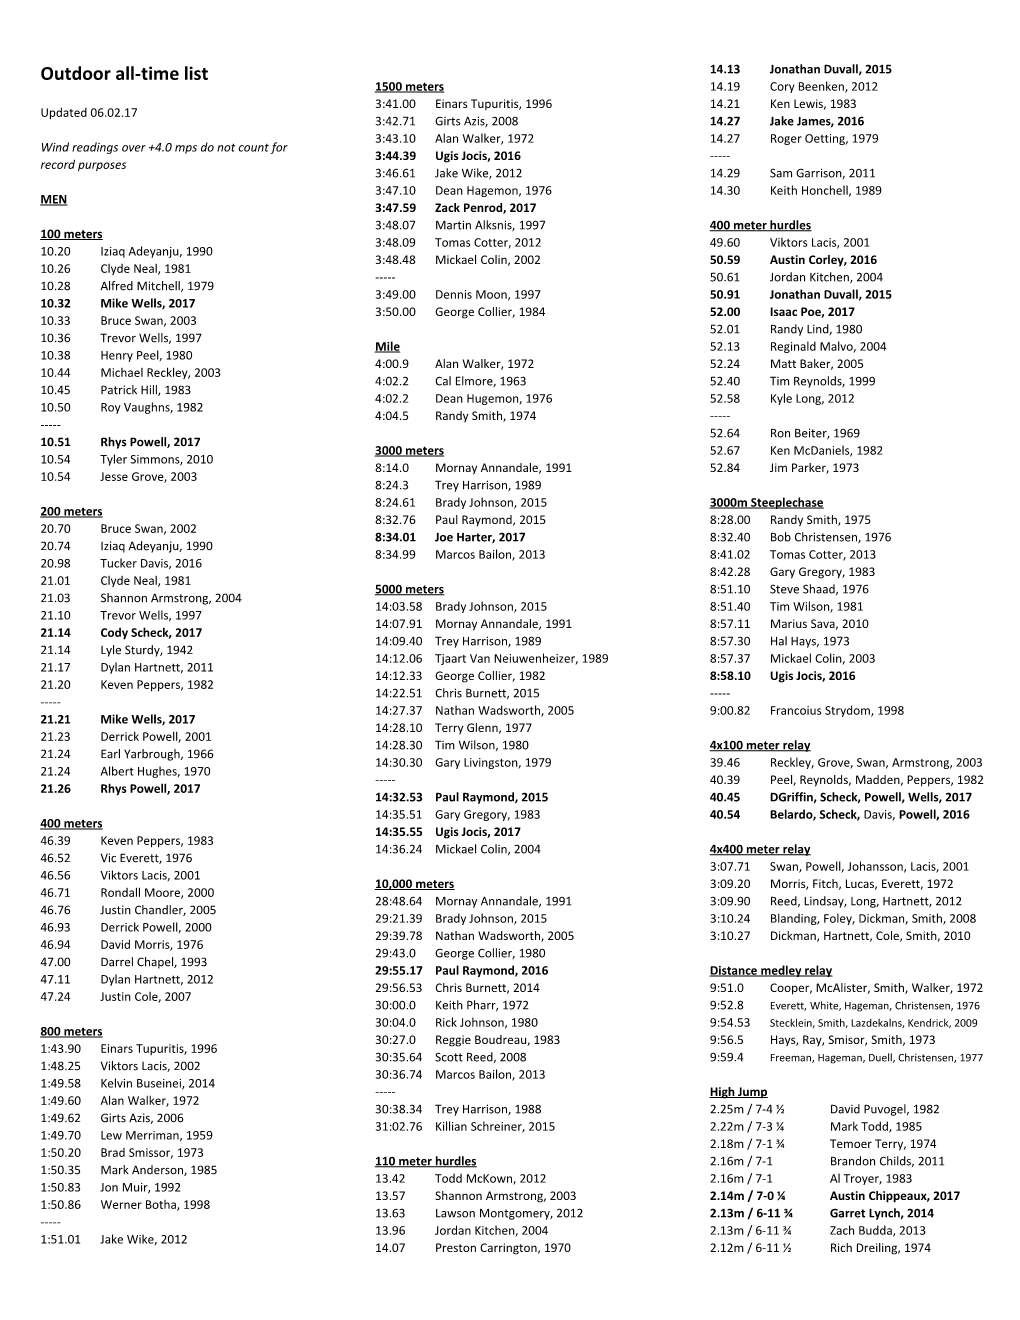 Outdoor All-Time List